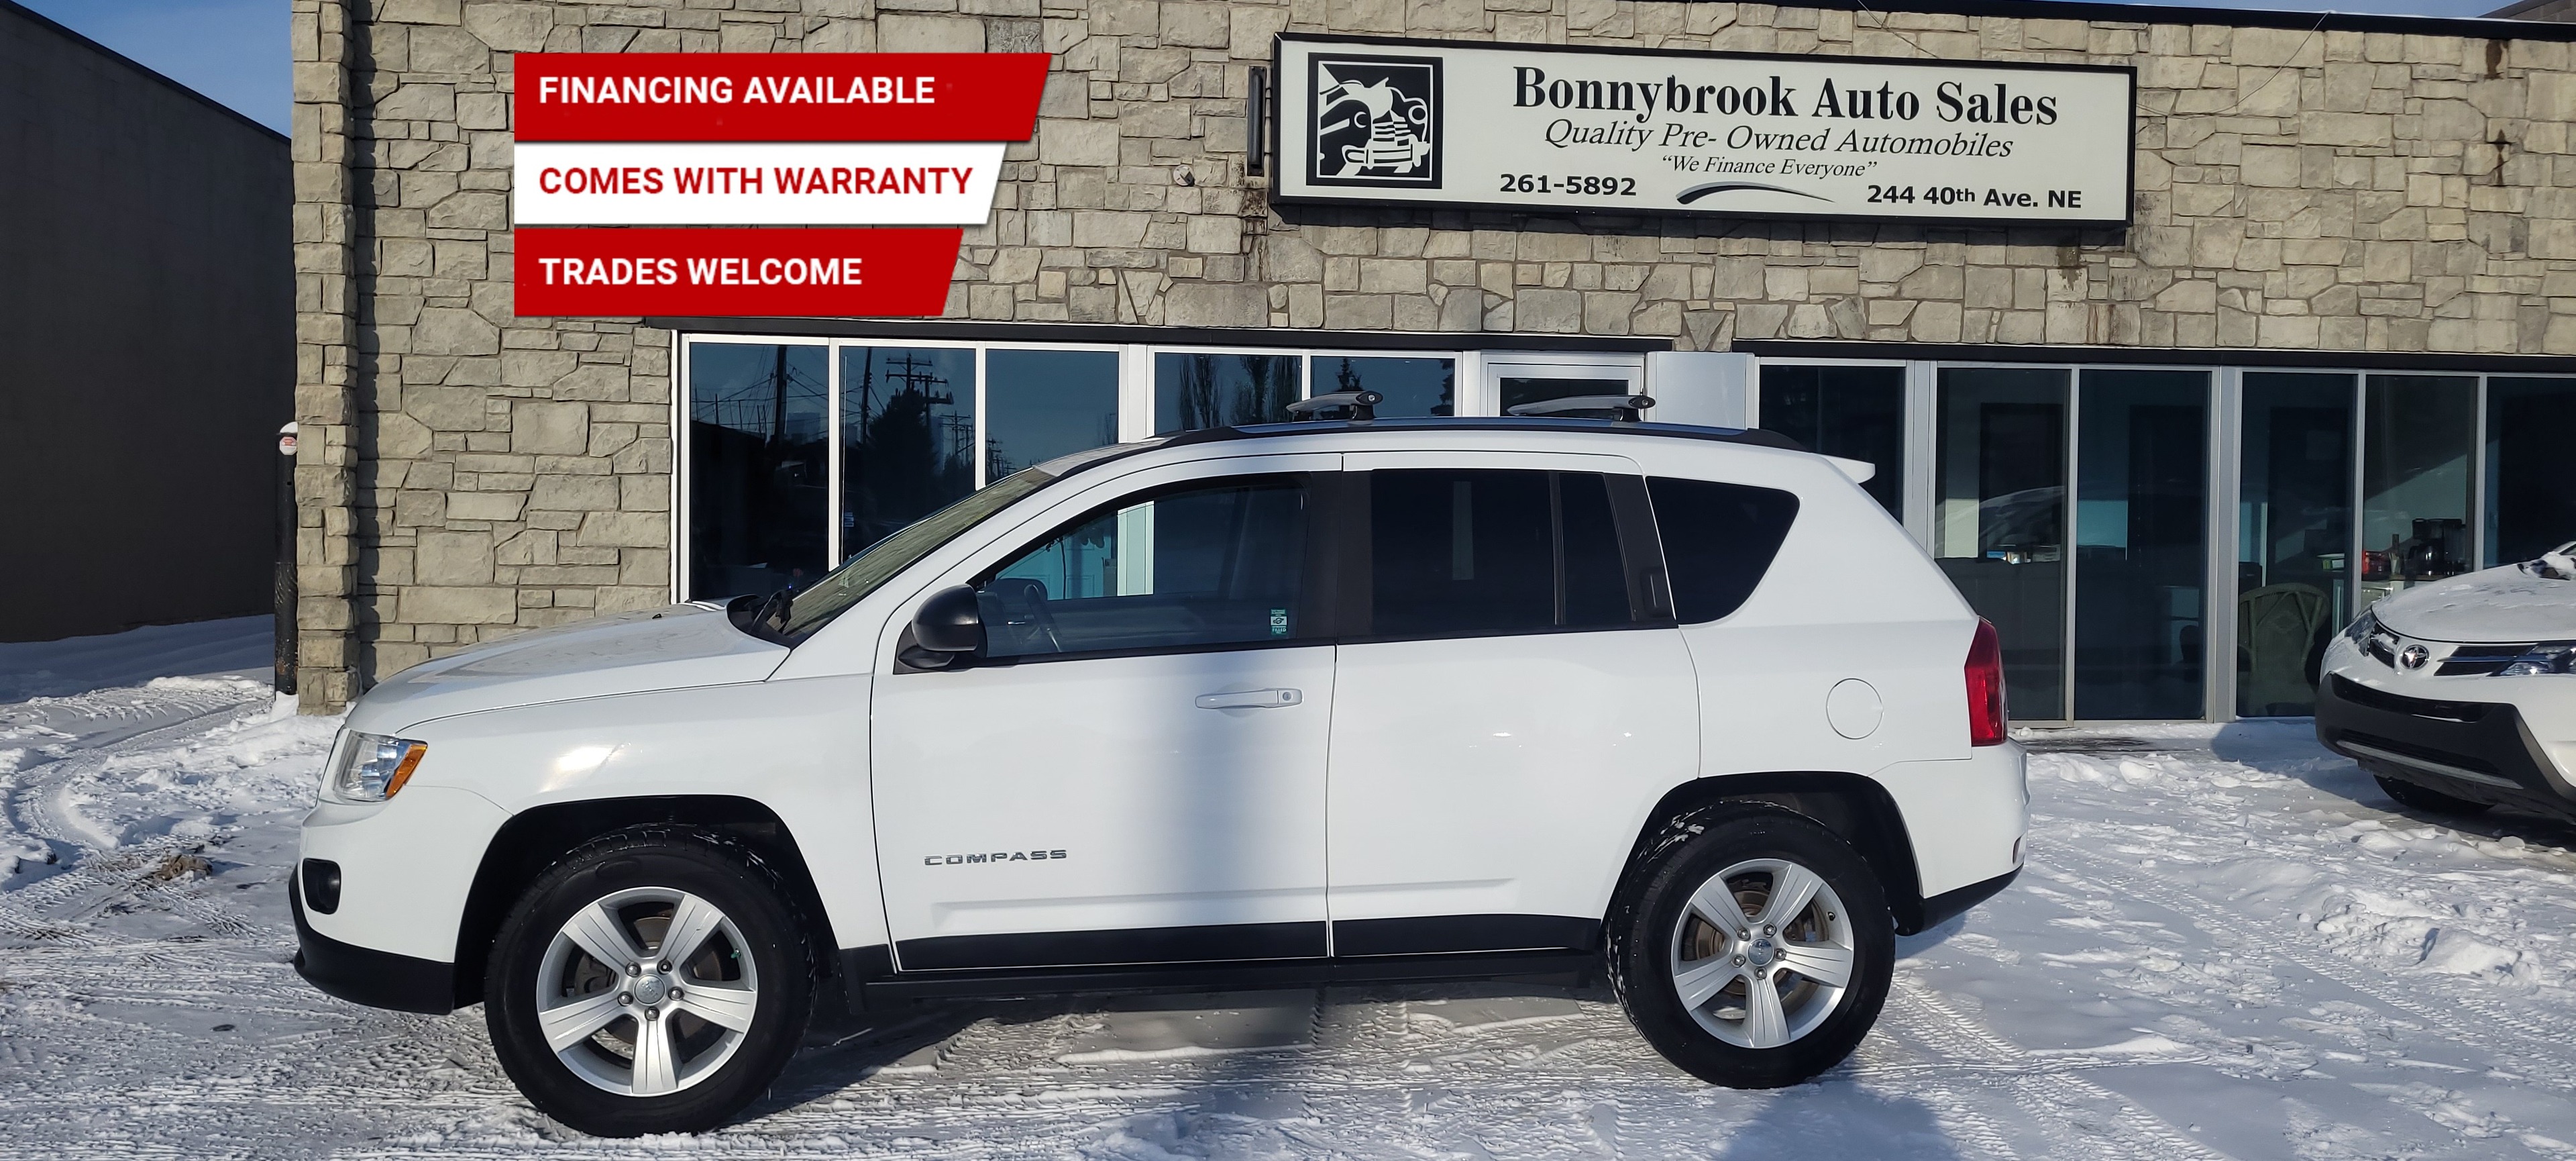 2011 Jeep Compass 4WD 4dr North Edition/Car starter/heated seats